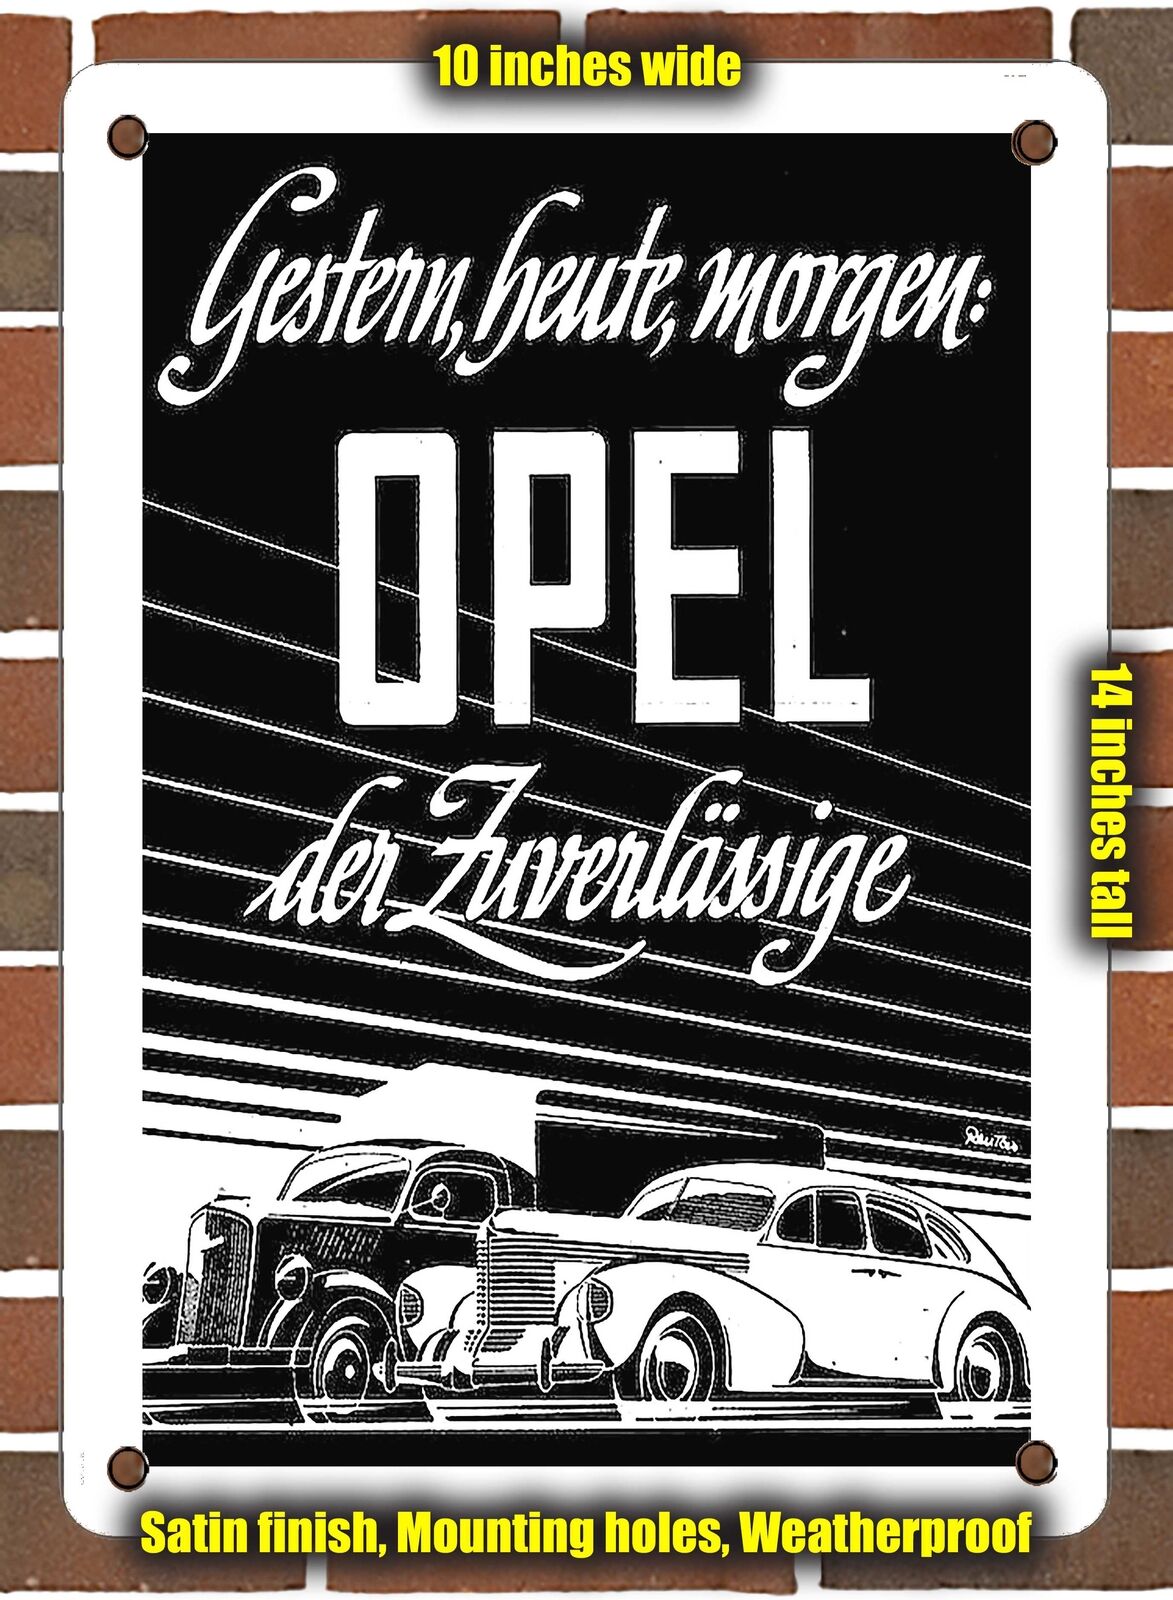 METAL SIGN - 1942 Opel Yesterday, today, tomorrow Opel, the reliable one